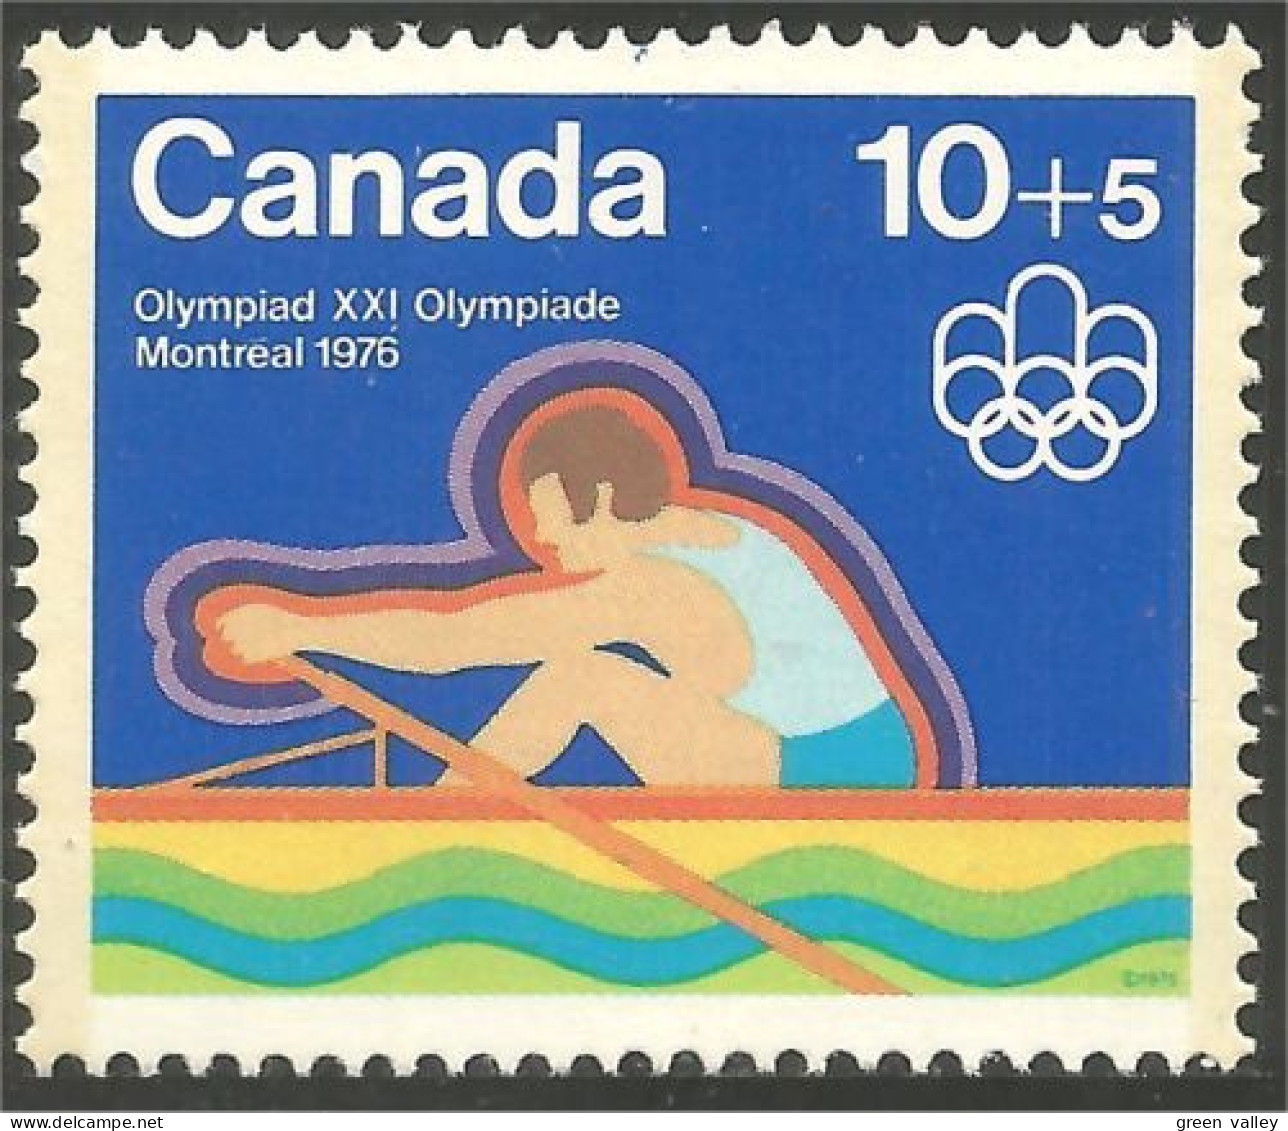 Canada 10c+5c Aviron Rowing Jeux Olympiques Montreal 1976 Olympic Games MNH ** Neuf SC (CB-05a) - Ungebraucht